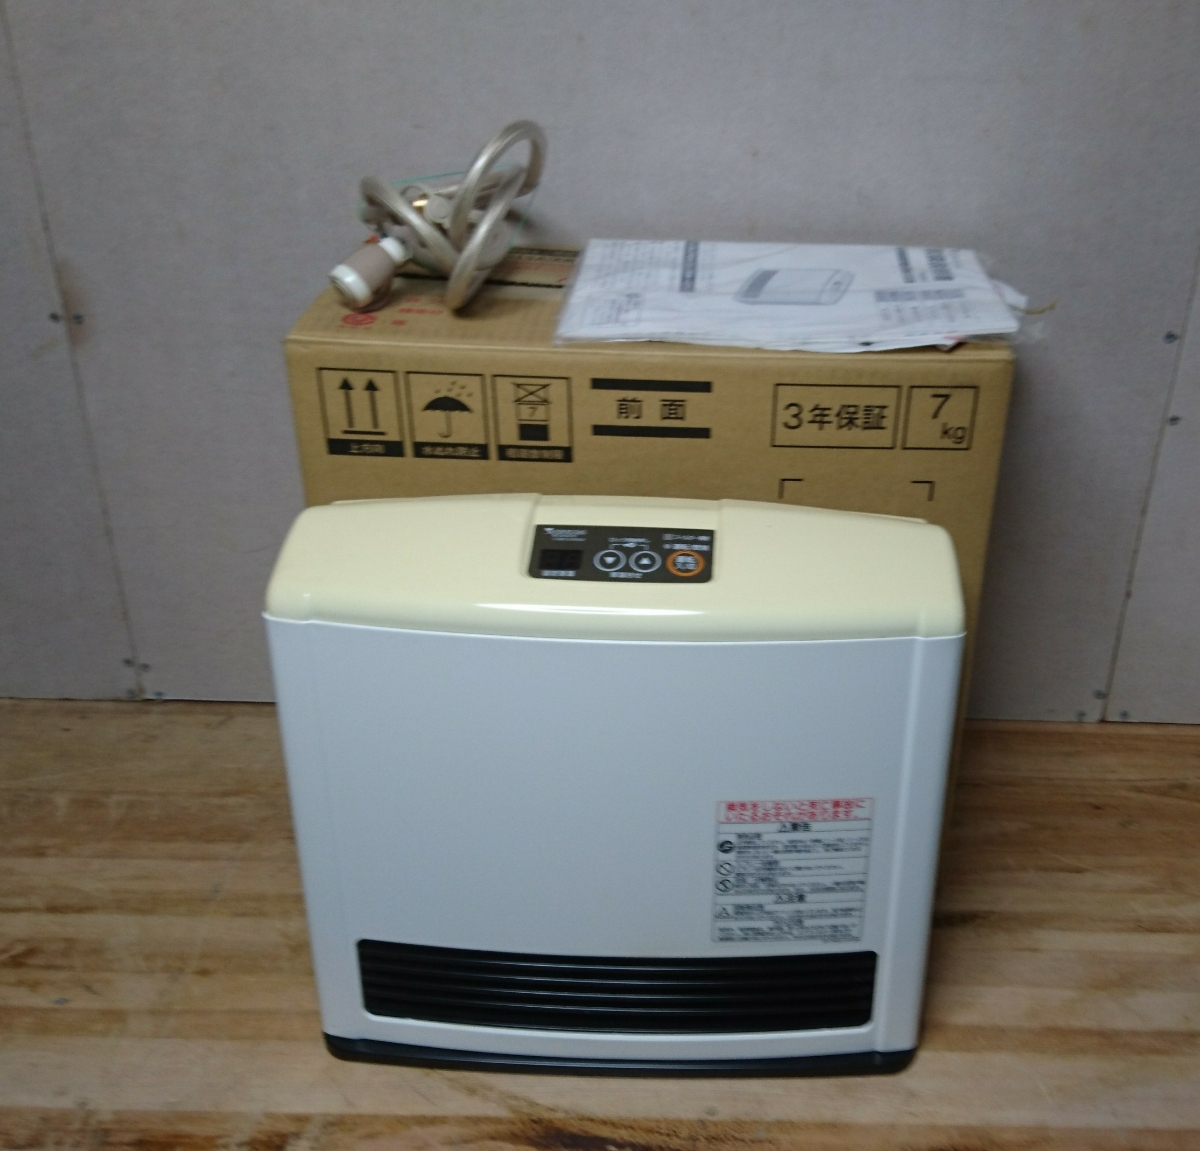 Tokyo Gas Gas Fan Heater Rr 2414s W City Gas 12a13a 79 within dimensions 1200 X 1151